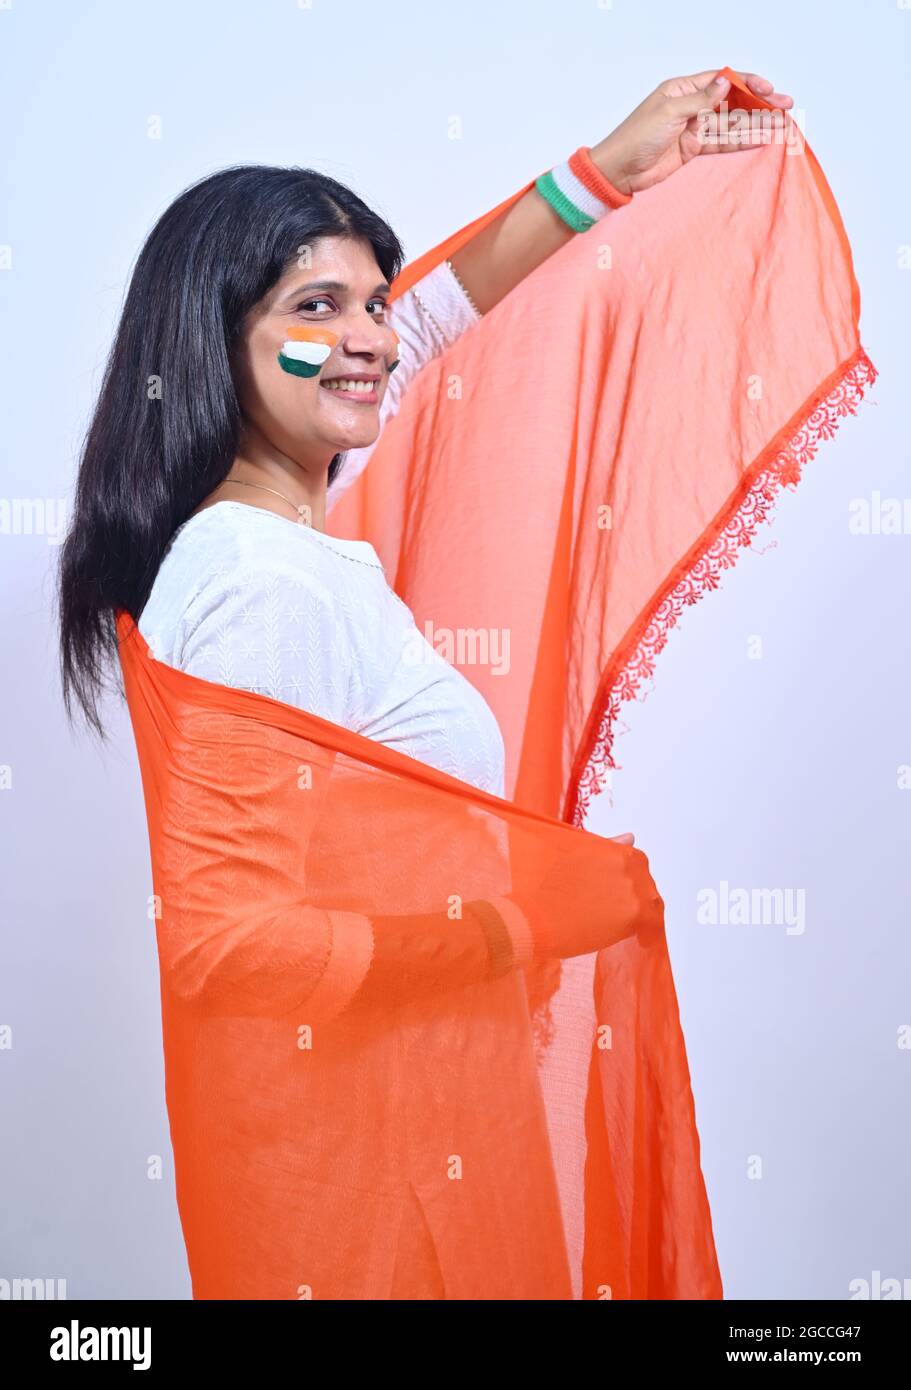 Young indian girl celebrating Independence Day of India. Stock Photo